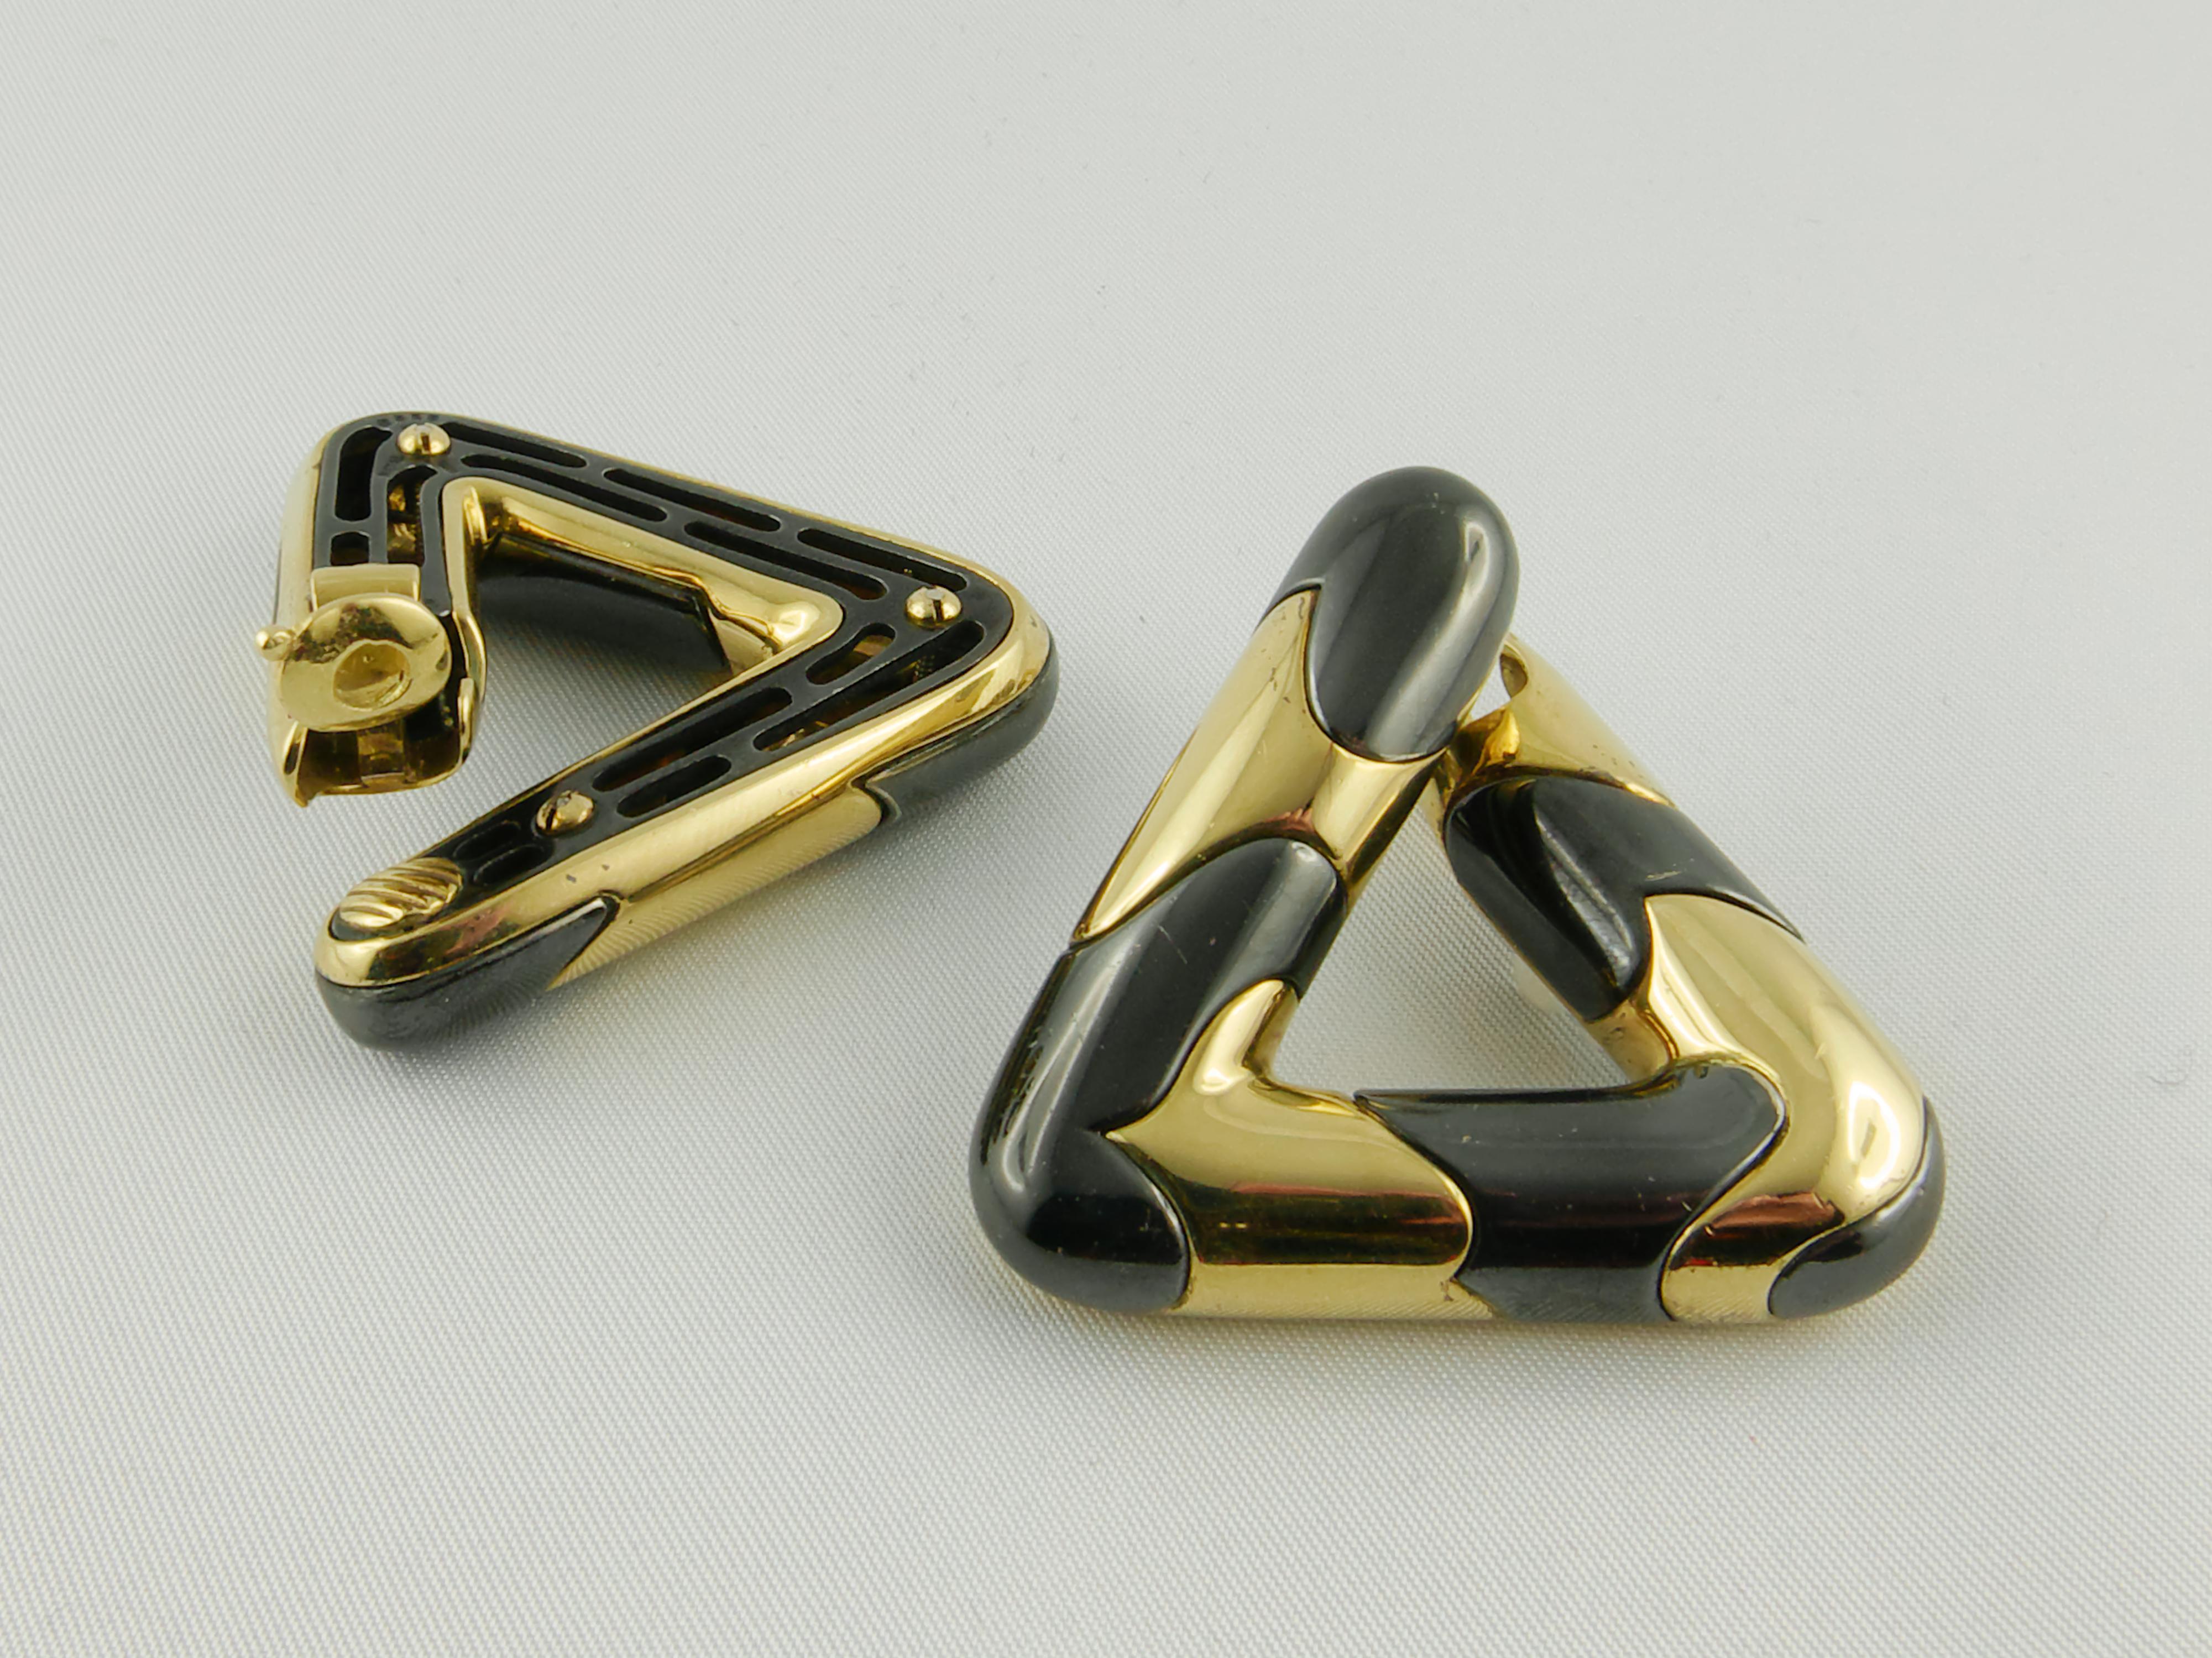 Attractive,  geometric design Earrings from Marina B’s Tom Collection.
Modern and intriguing  large triangle with rounded edges Earrings crafted in Italy in 1987 in 18k polished chunky  Yellow Gold with Blackened Metal inserts  .
This recognizable 